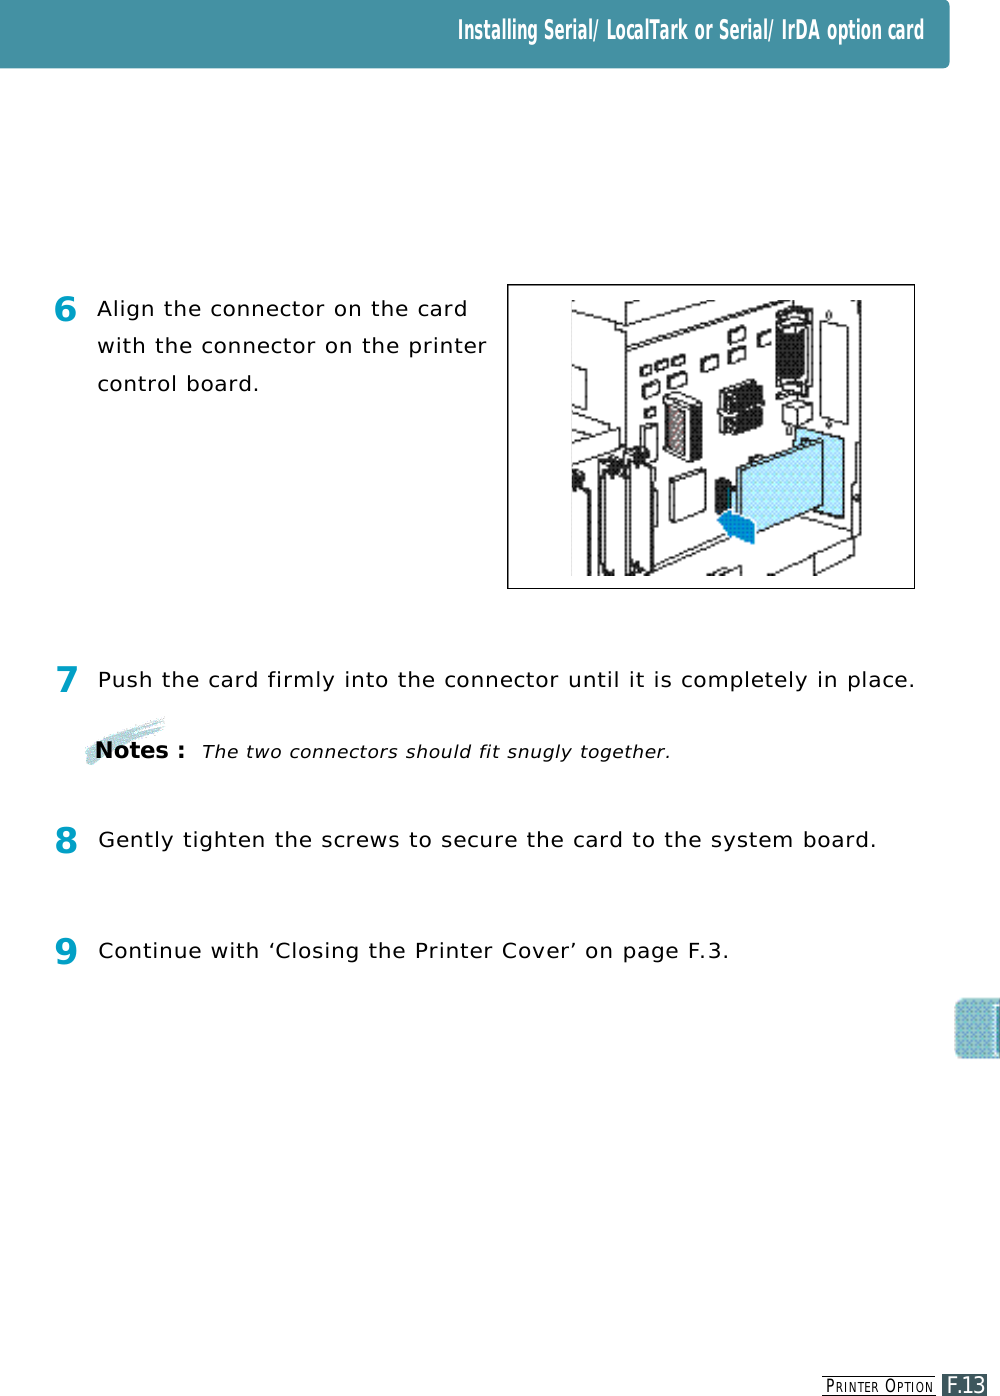 Installing Serial/LocalTark or Serial/IrDA option cardPR I N T E R OP T I O NF.137Push the card firmly into the connector until it is completely in place.8Gently tighten the screws to secure the card to the system board.9Continue with ‘Closing the Printer Cove r ’ on page F. 3.6Align the connector on the cardwith the connector on the printercontrol board.Notes :The two connectors should fit snugly together.